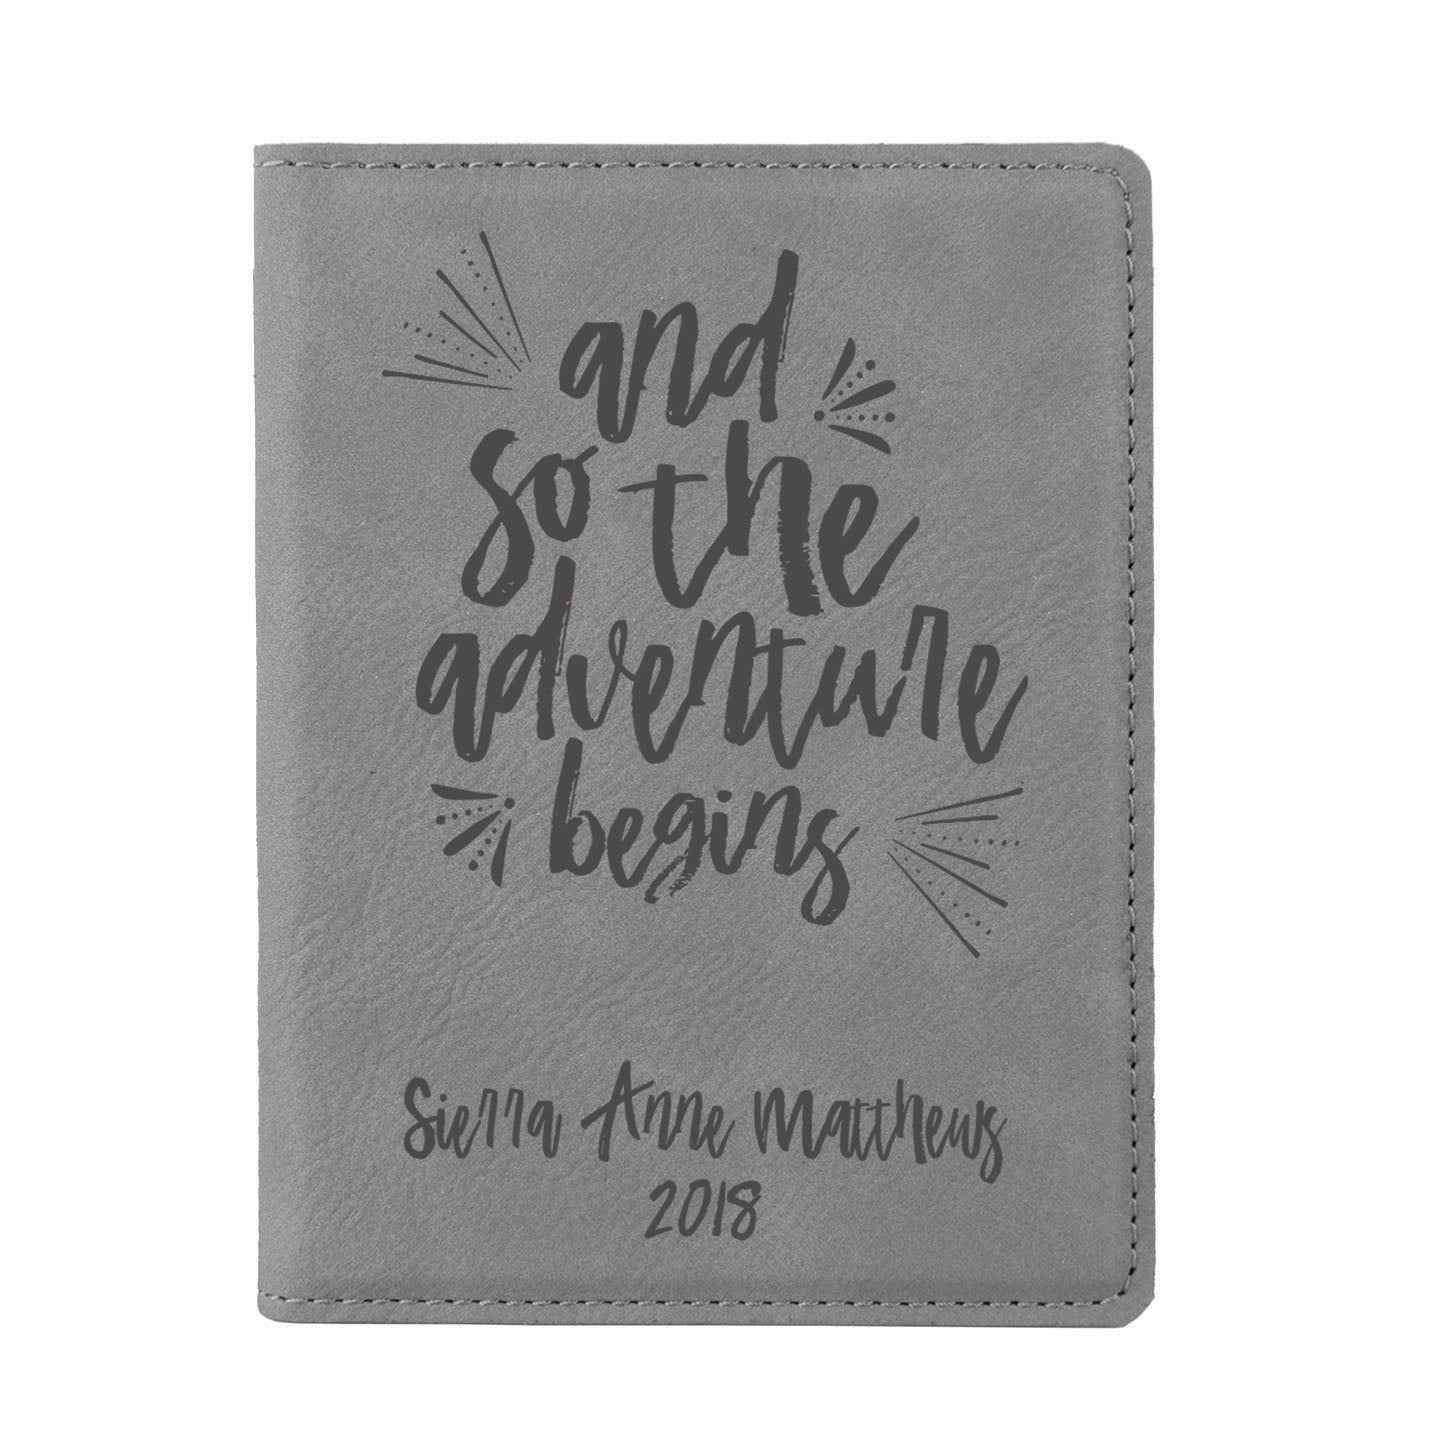 Personalized Monogrammed Passport Cover